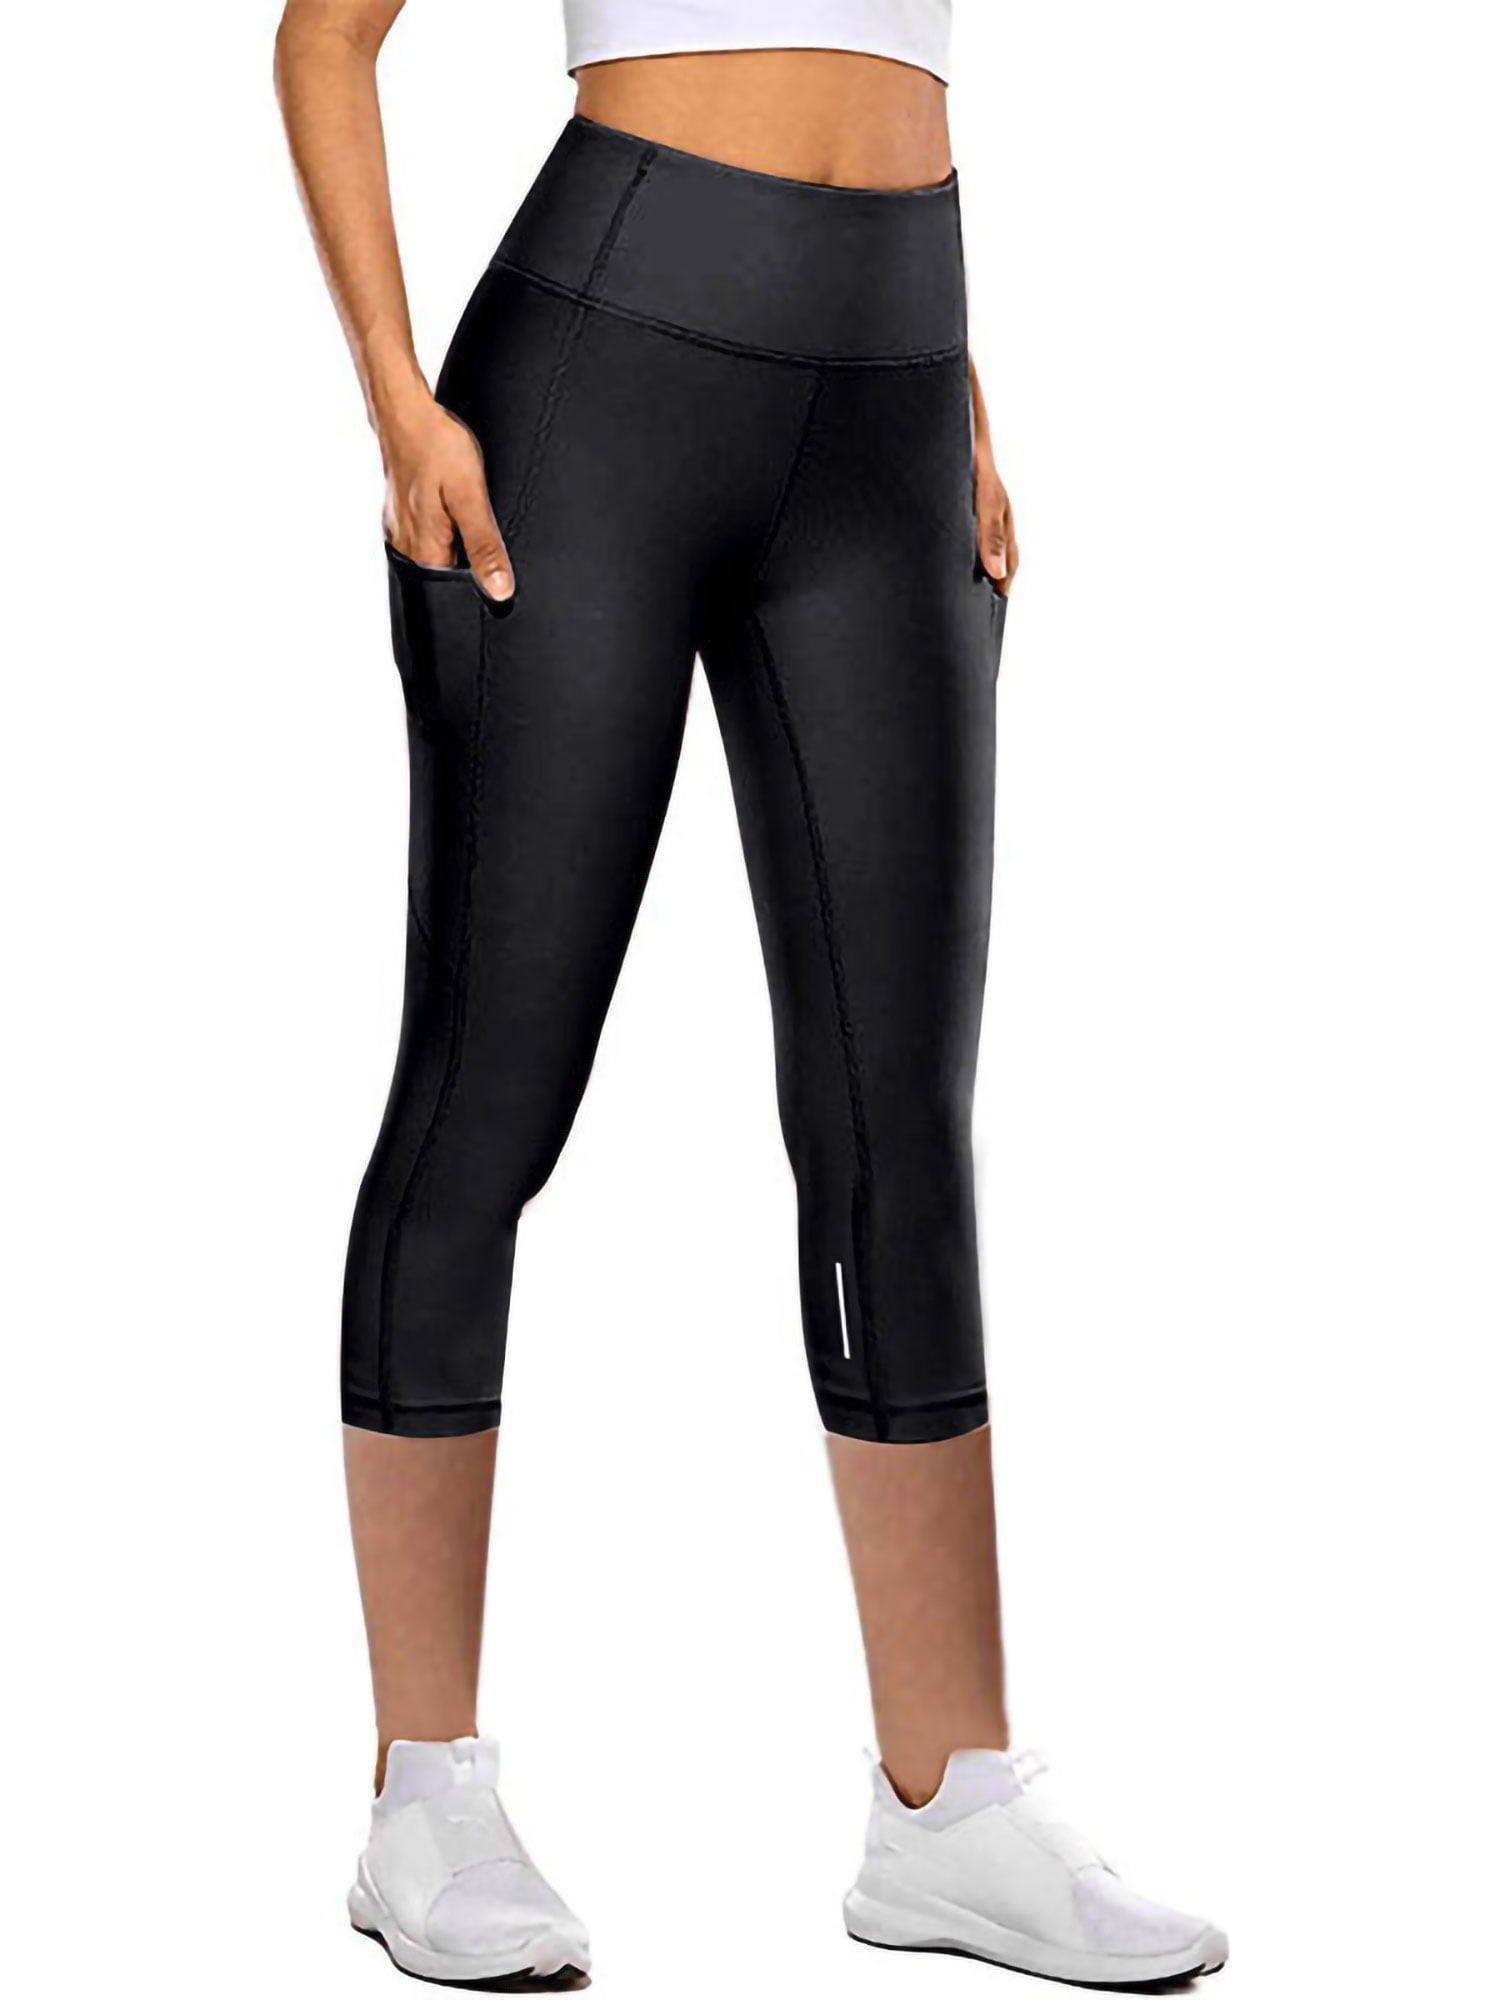 Women High Waisted Yoga Pants with Pockets 3/4 Cycling Tights Bicycle Bike  Riding Capris Pants Workout Running Leggings